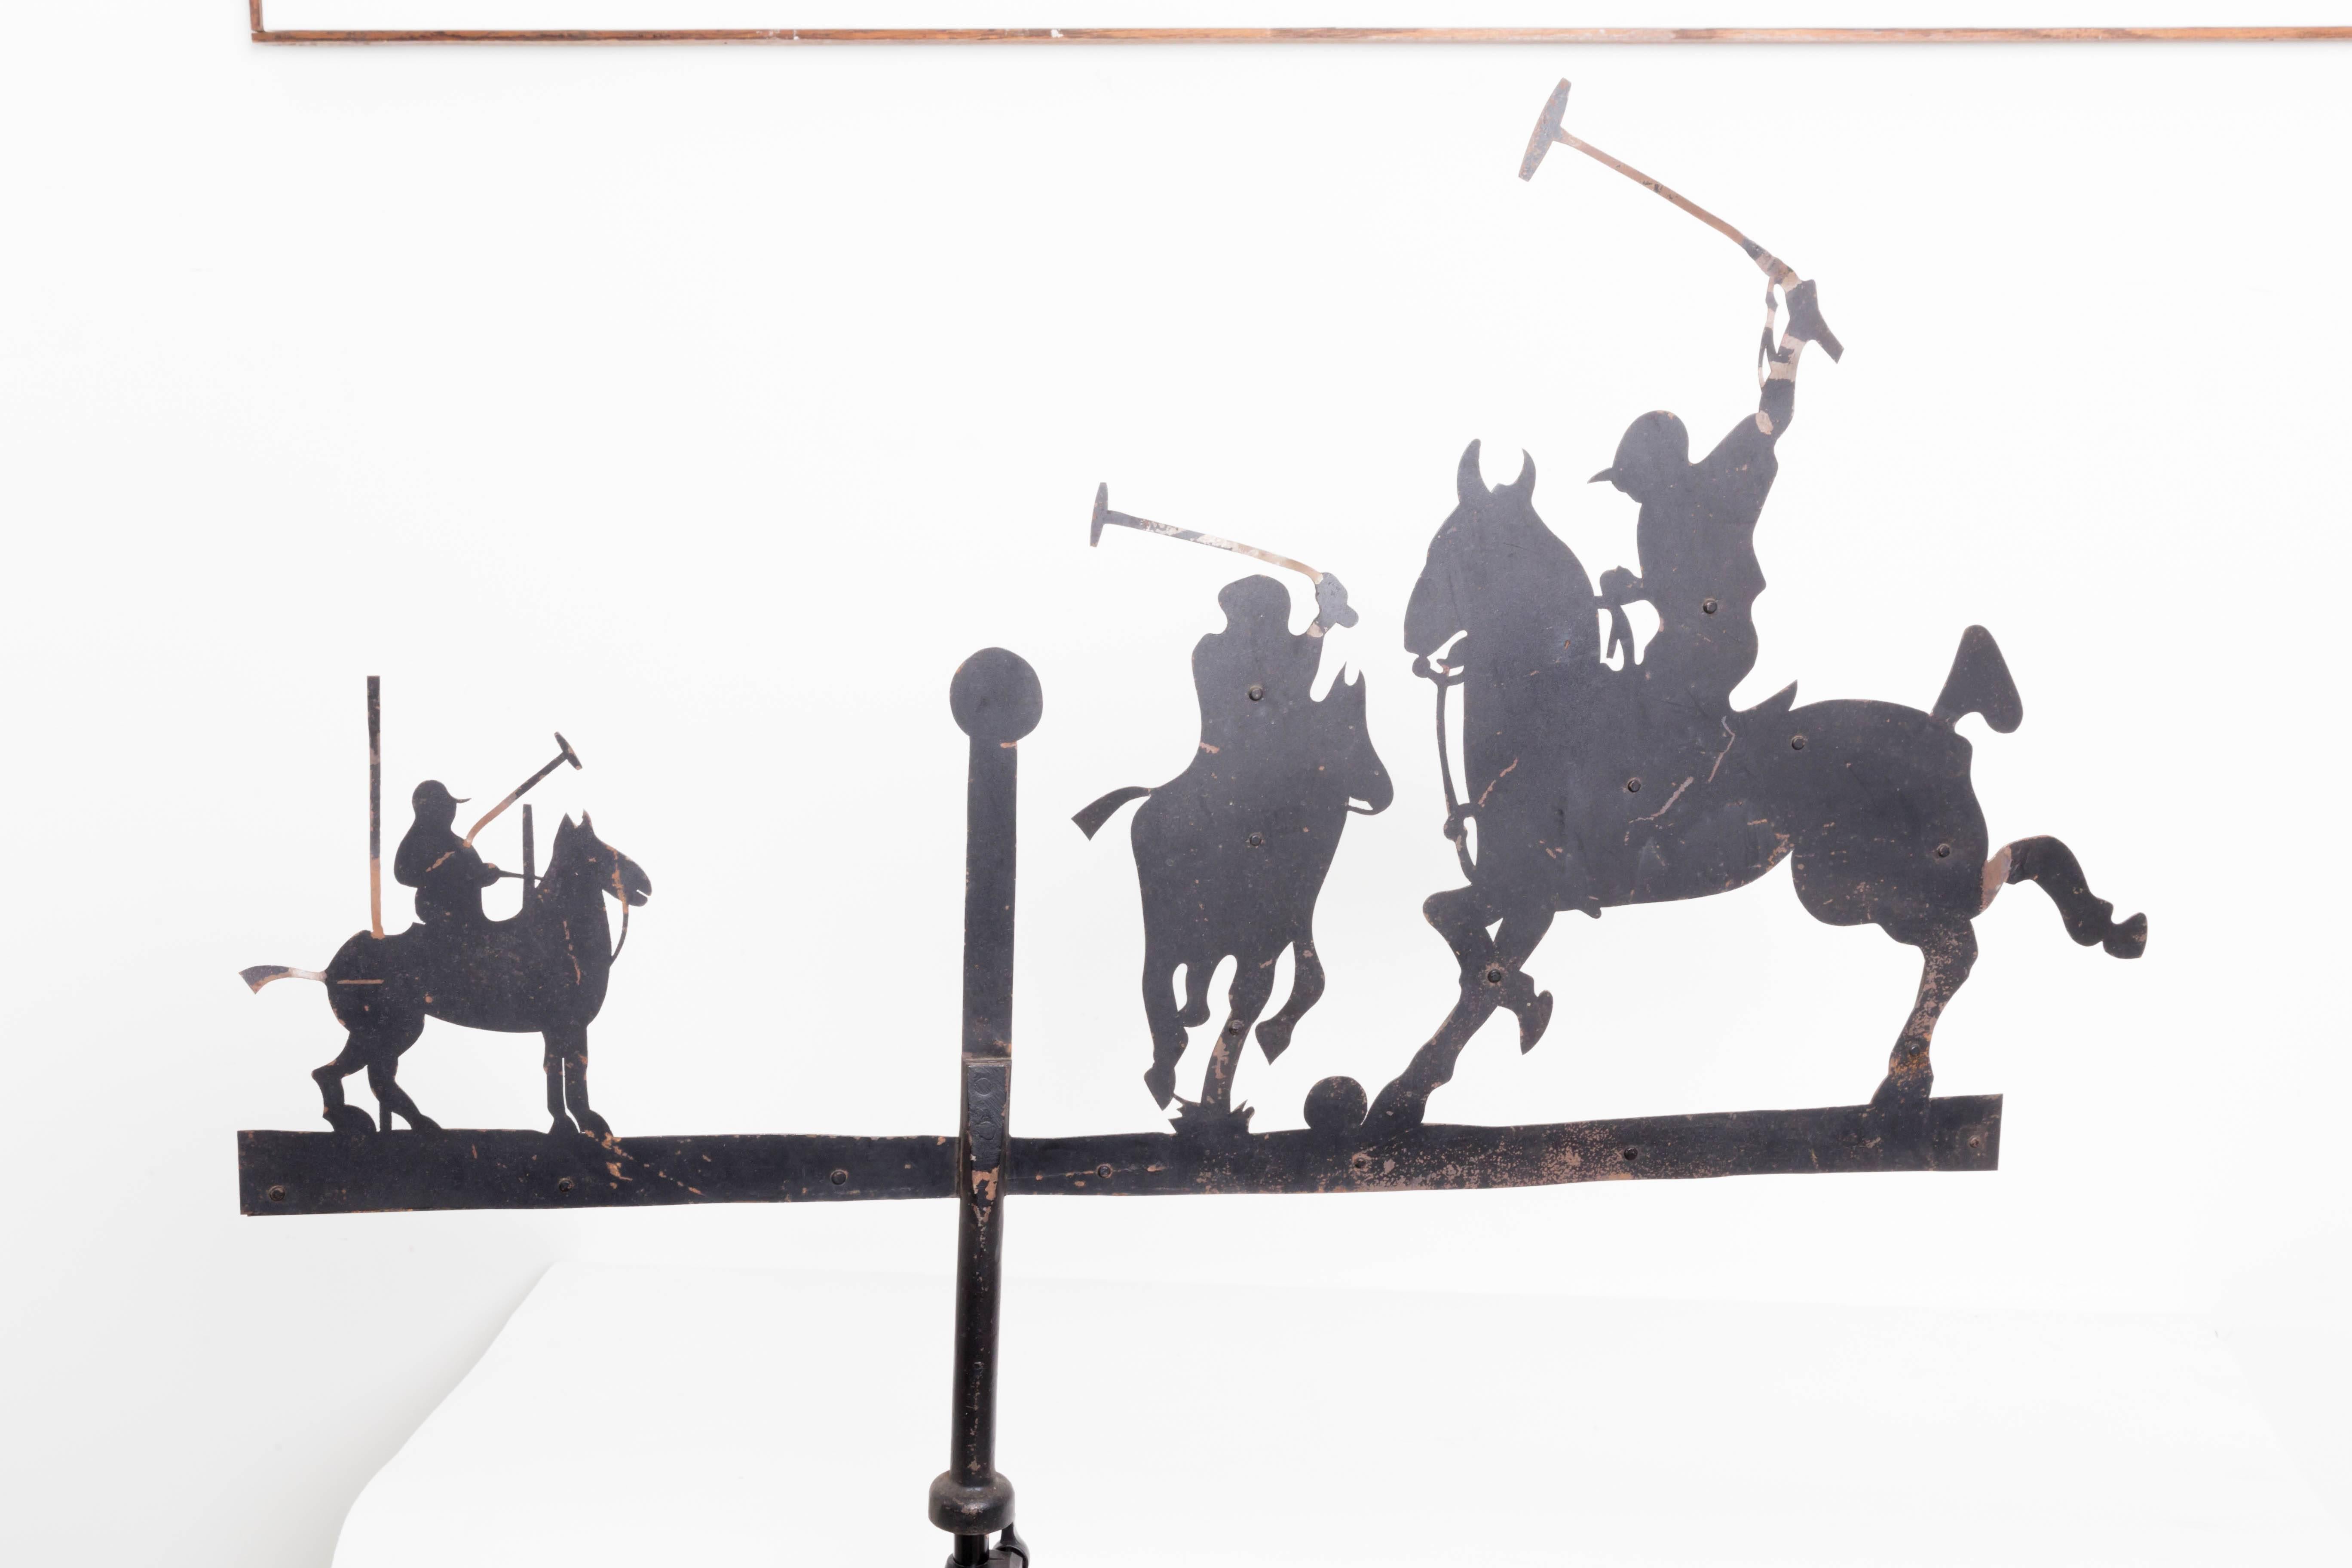 Sheet metal weathervane. Three players with ball in play, circa 1920, in the style of Todd hunter, provanance, M.J. Knoud Madison Ave., NYC.